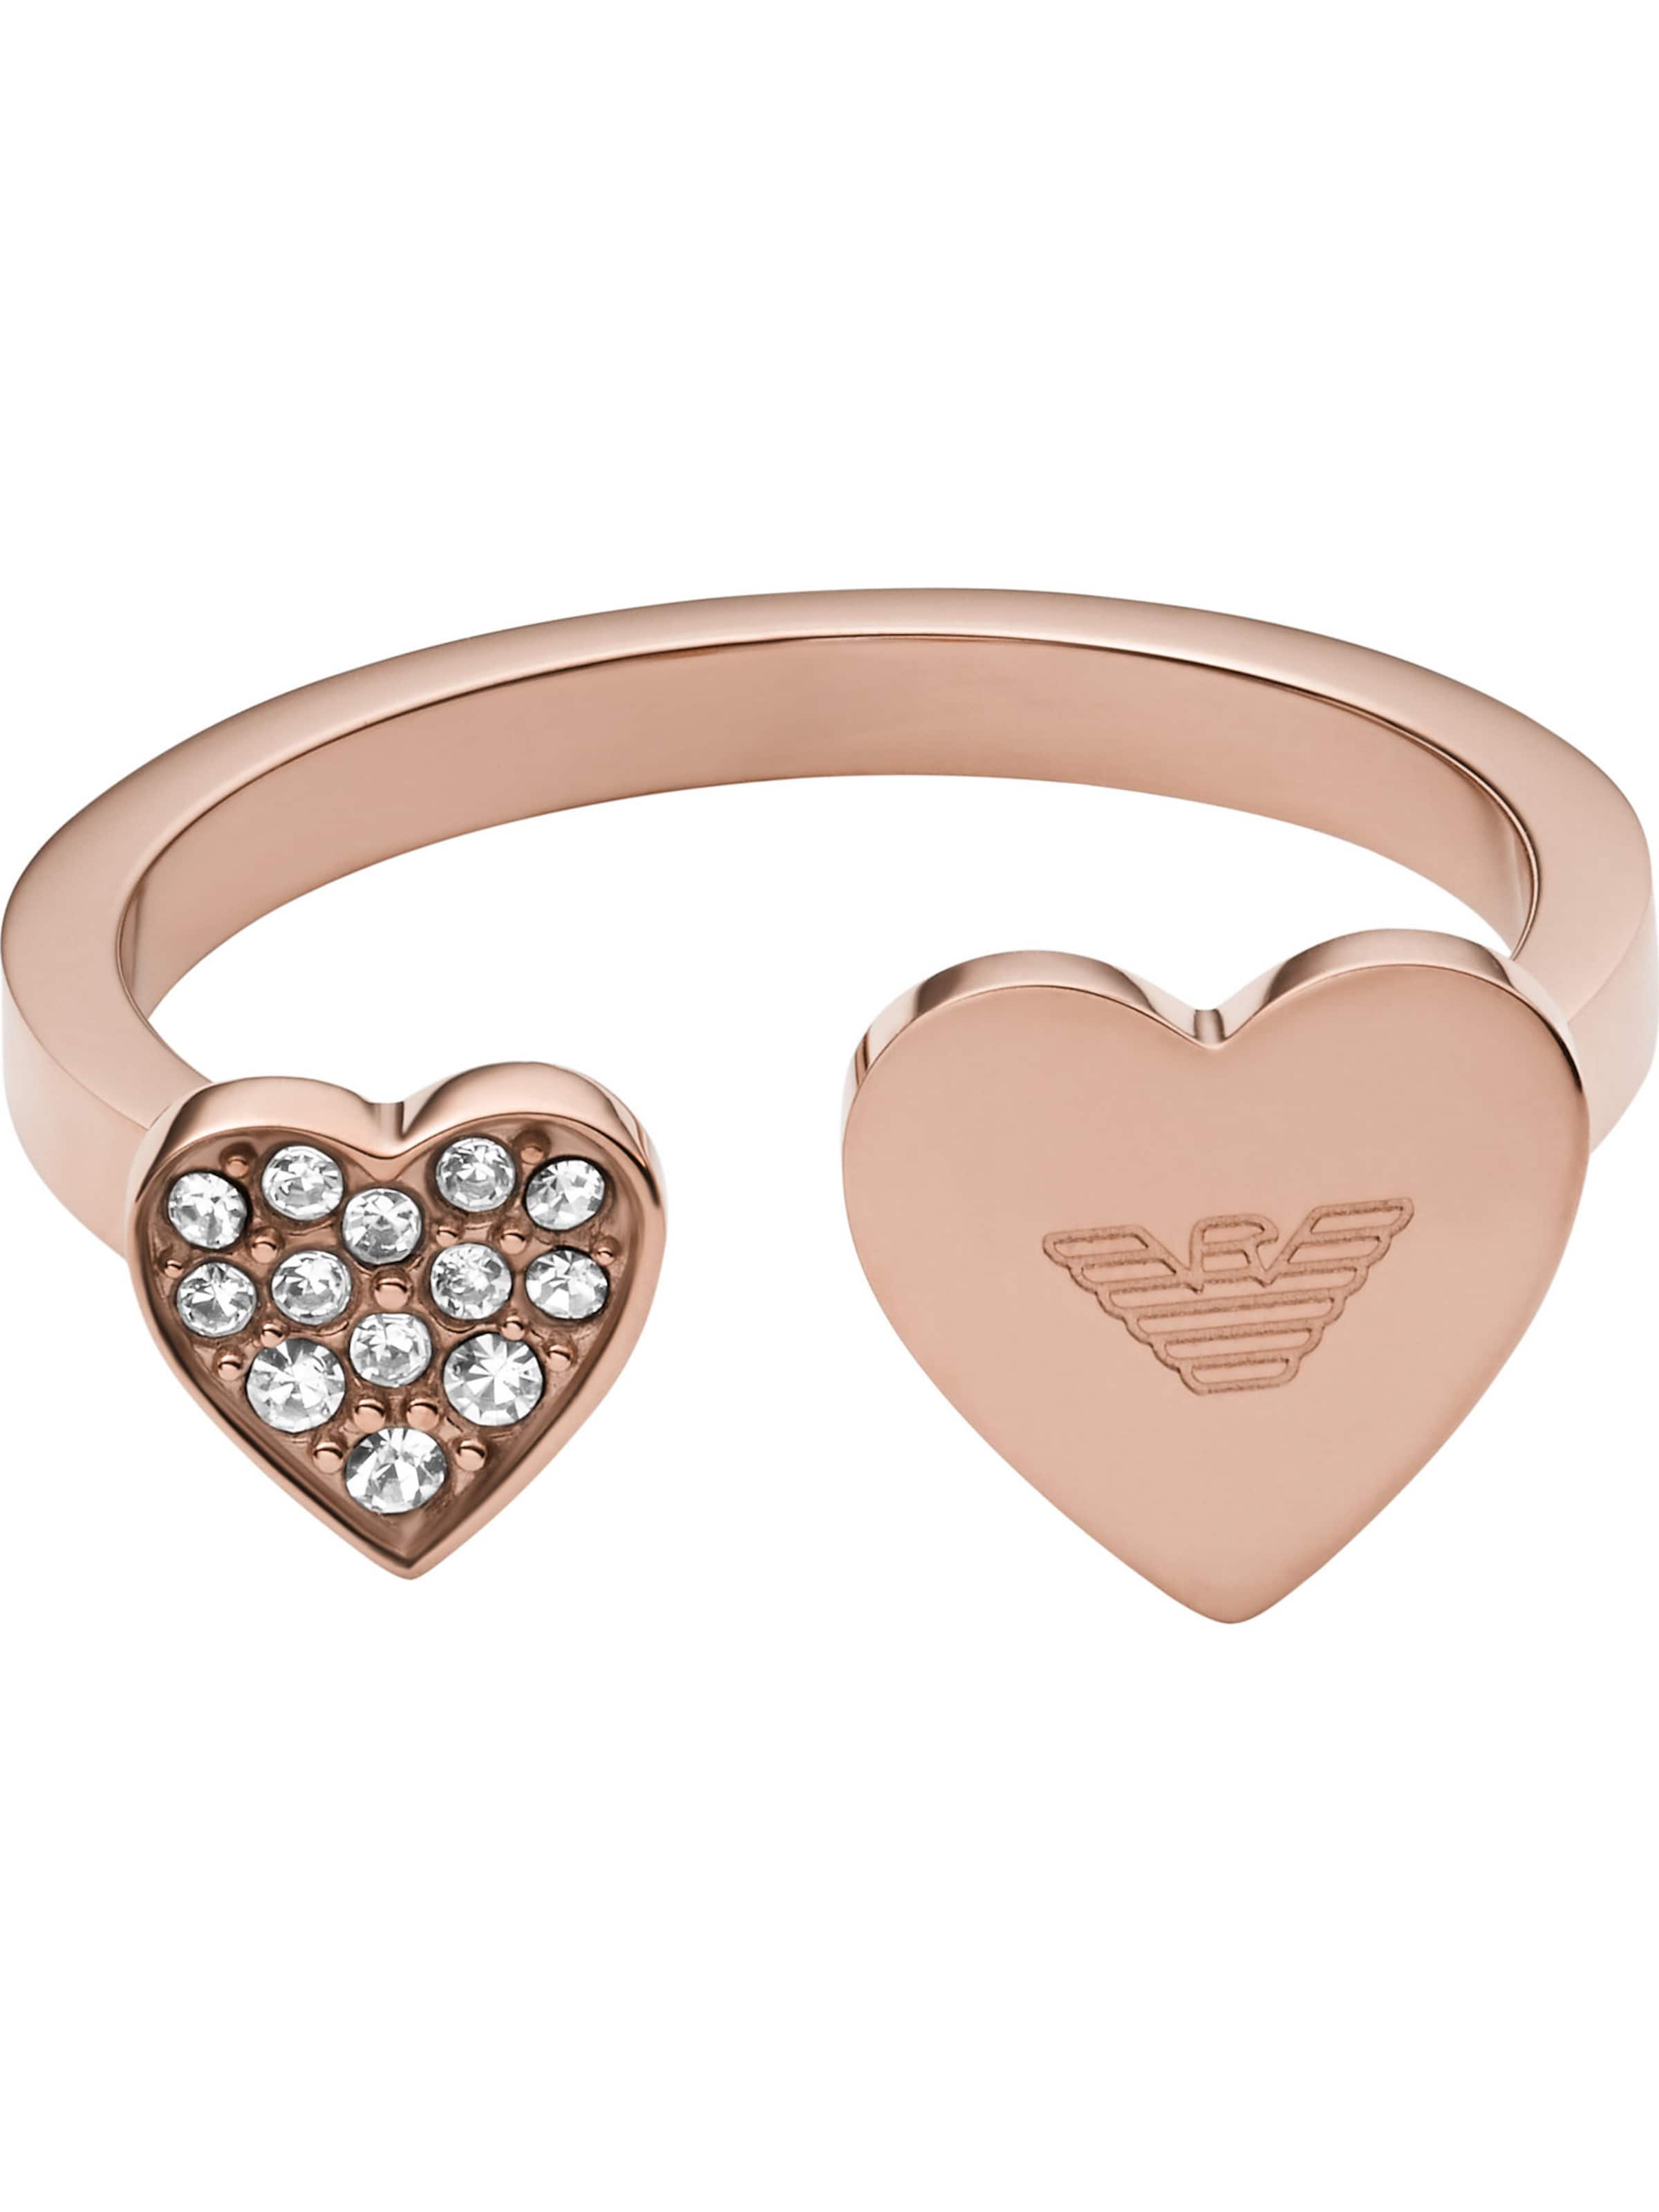 Emporio Armani Ring in Pink 